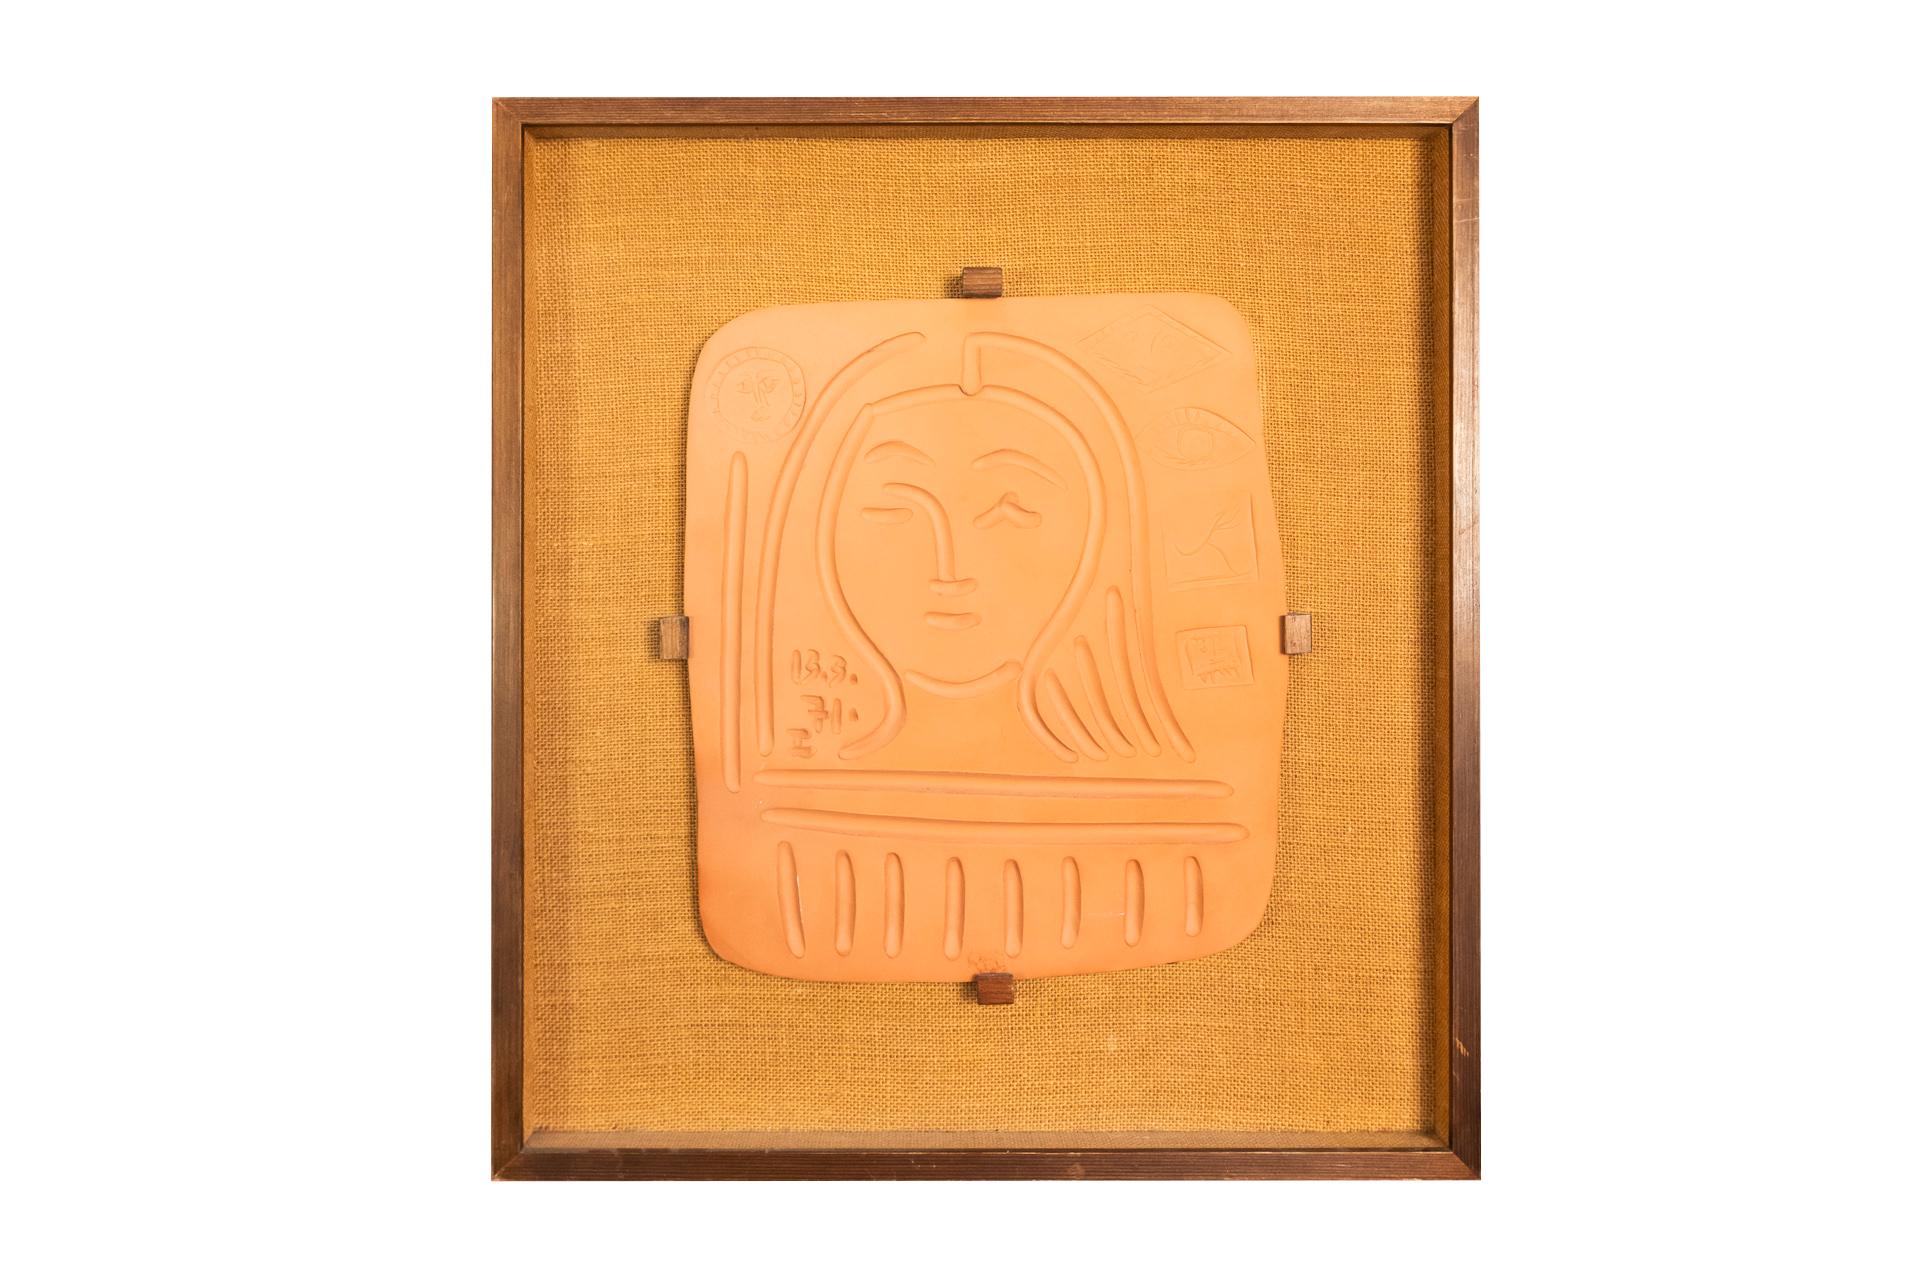 Pablo Picasso Madoura,
"Visage de femme", 1971, Rectangular plate,
Red earthenware,
Five red hallmarks,
Edition of 200 numbered,
Framed,
Edition Madoura.

Reference: Bibliographie Picasso, Catalogue de l'œuvre céramique éditée, 1947-1971 by Alain